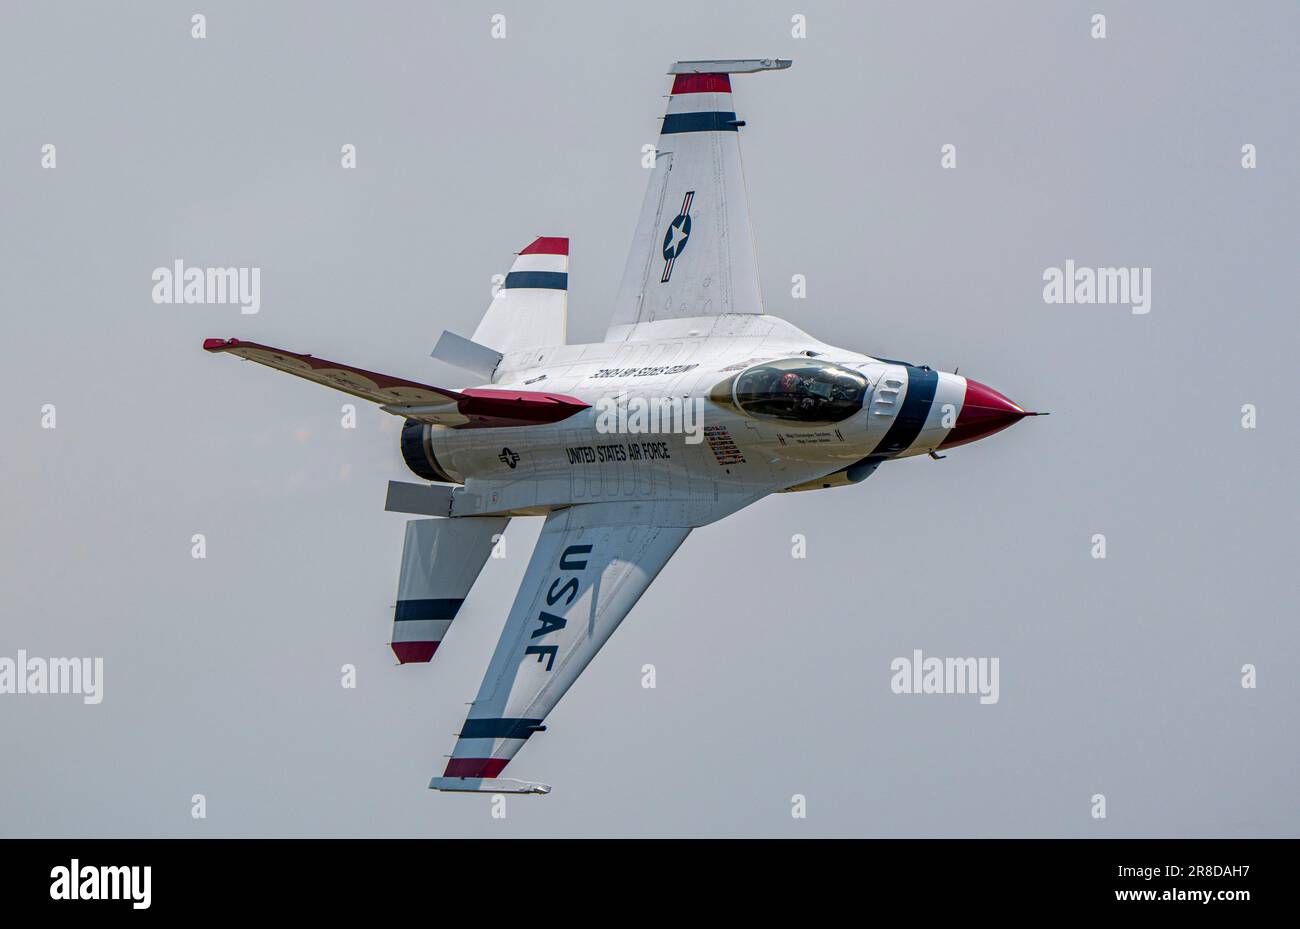 The United States Air Force Air Demonstration Squadron 'Thunderbirds' perform in Latrobe, Pennsylvania, June 15-18, 2023. The Thunderbirds headlined the Westmoreland Air Show to demonstrate the pride, precision, and professionalism of the 695,000 total force American Airmen across the globe. (U.S. Air Force photo by Staff Sgt. Dakota Carter) Stock Photo